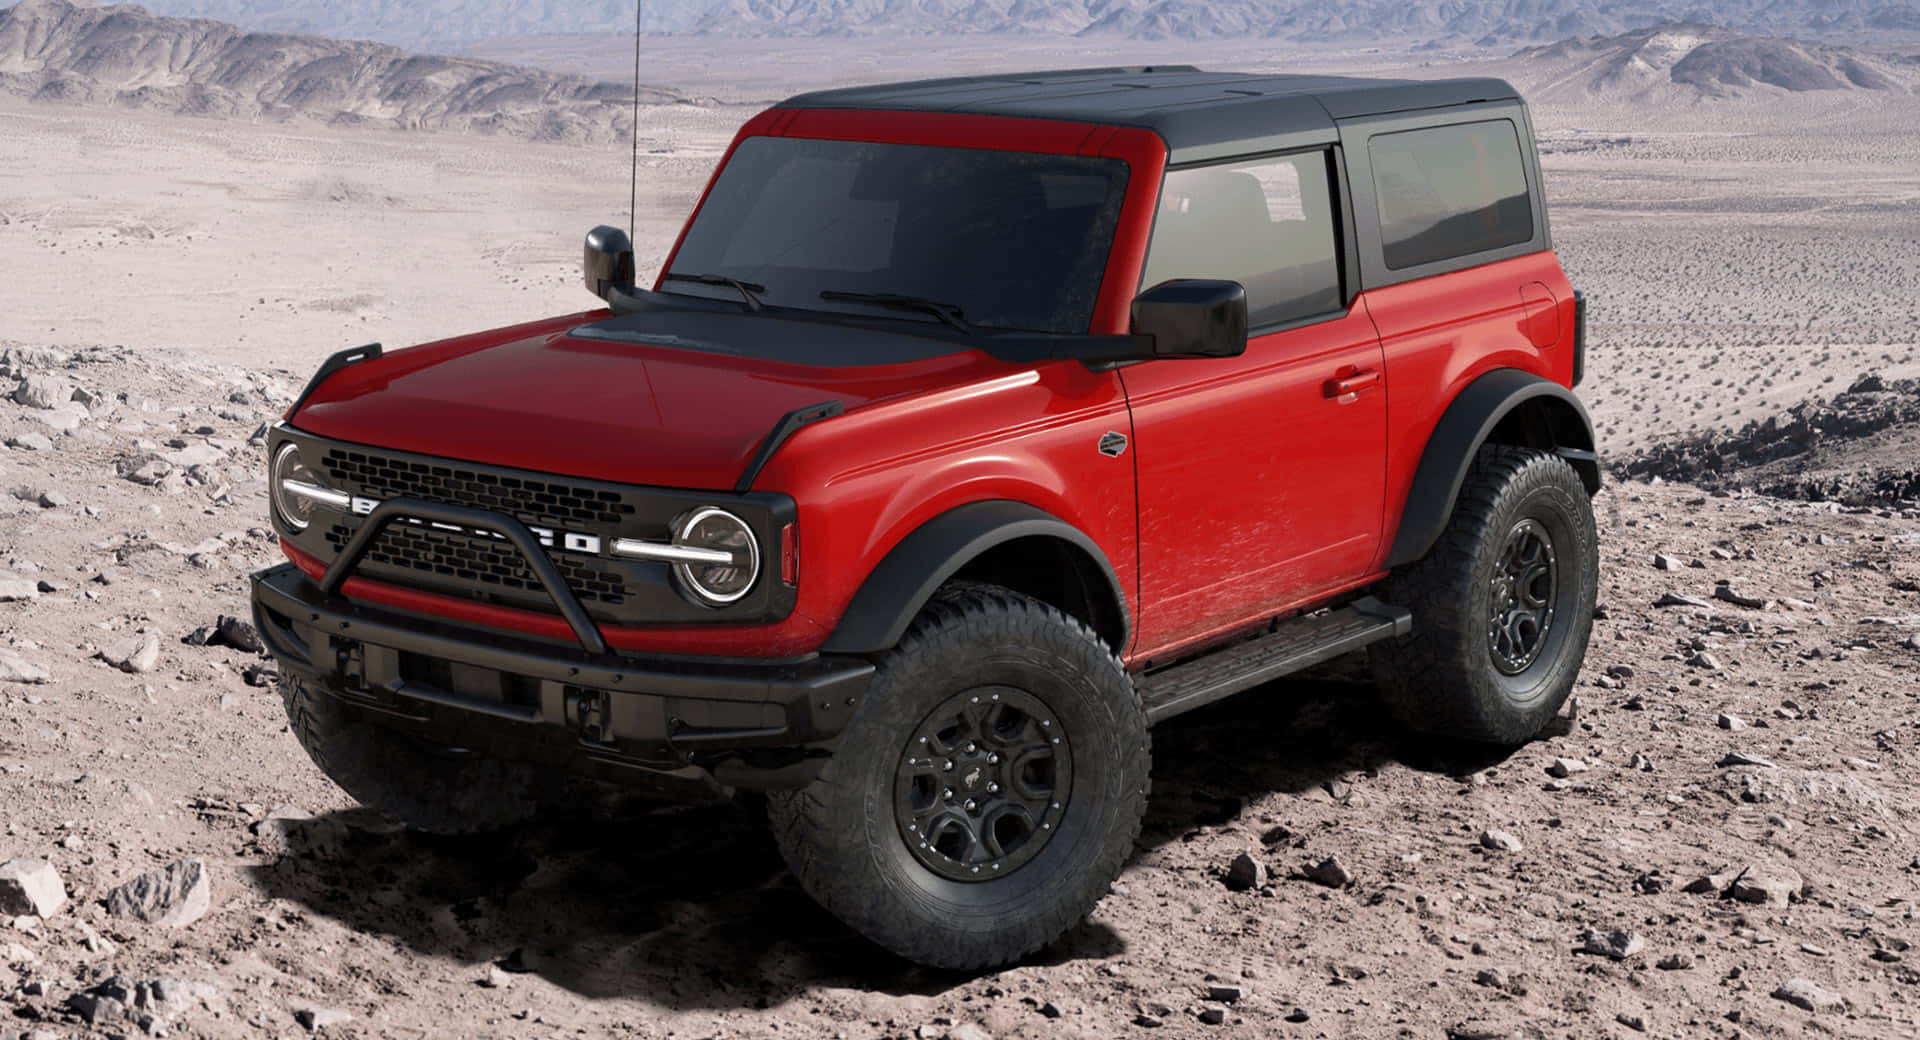 The 2020 Ford Bronco: Ready To Explore